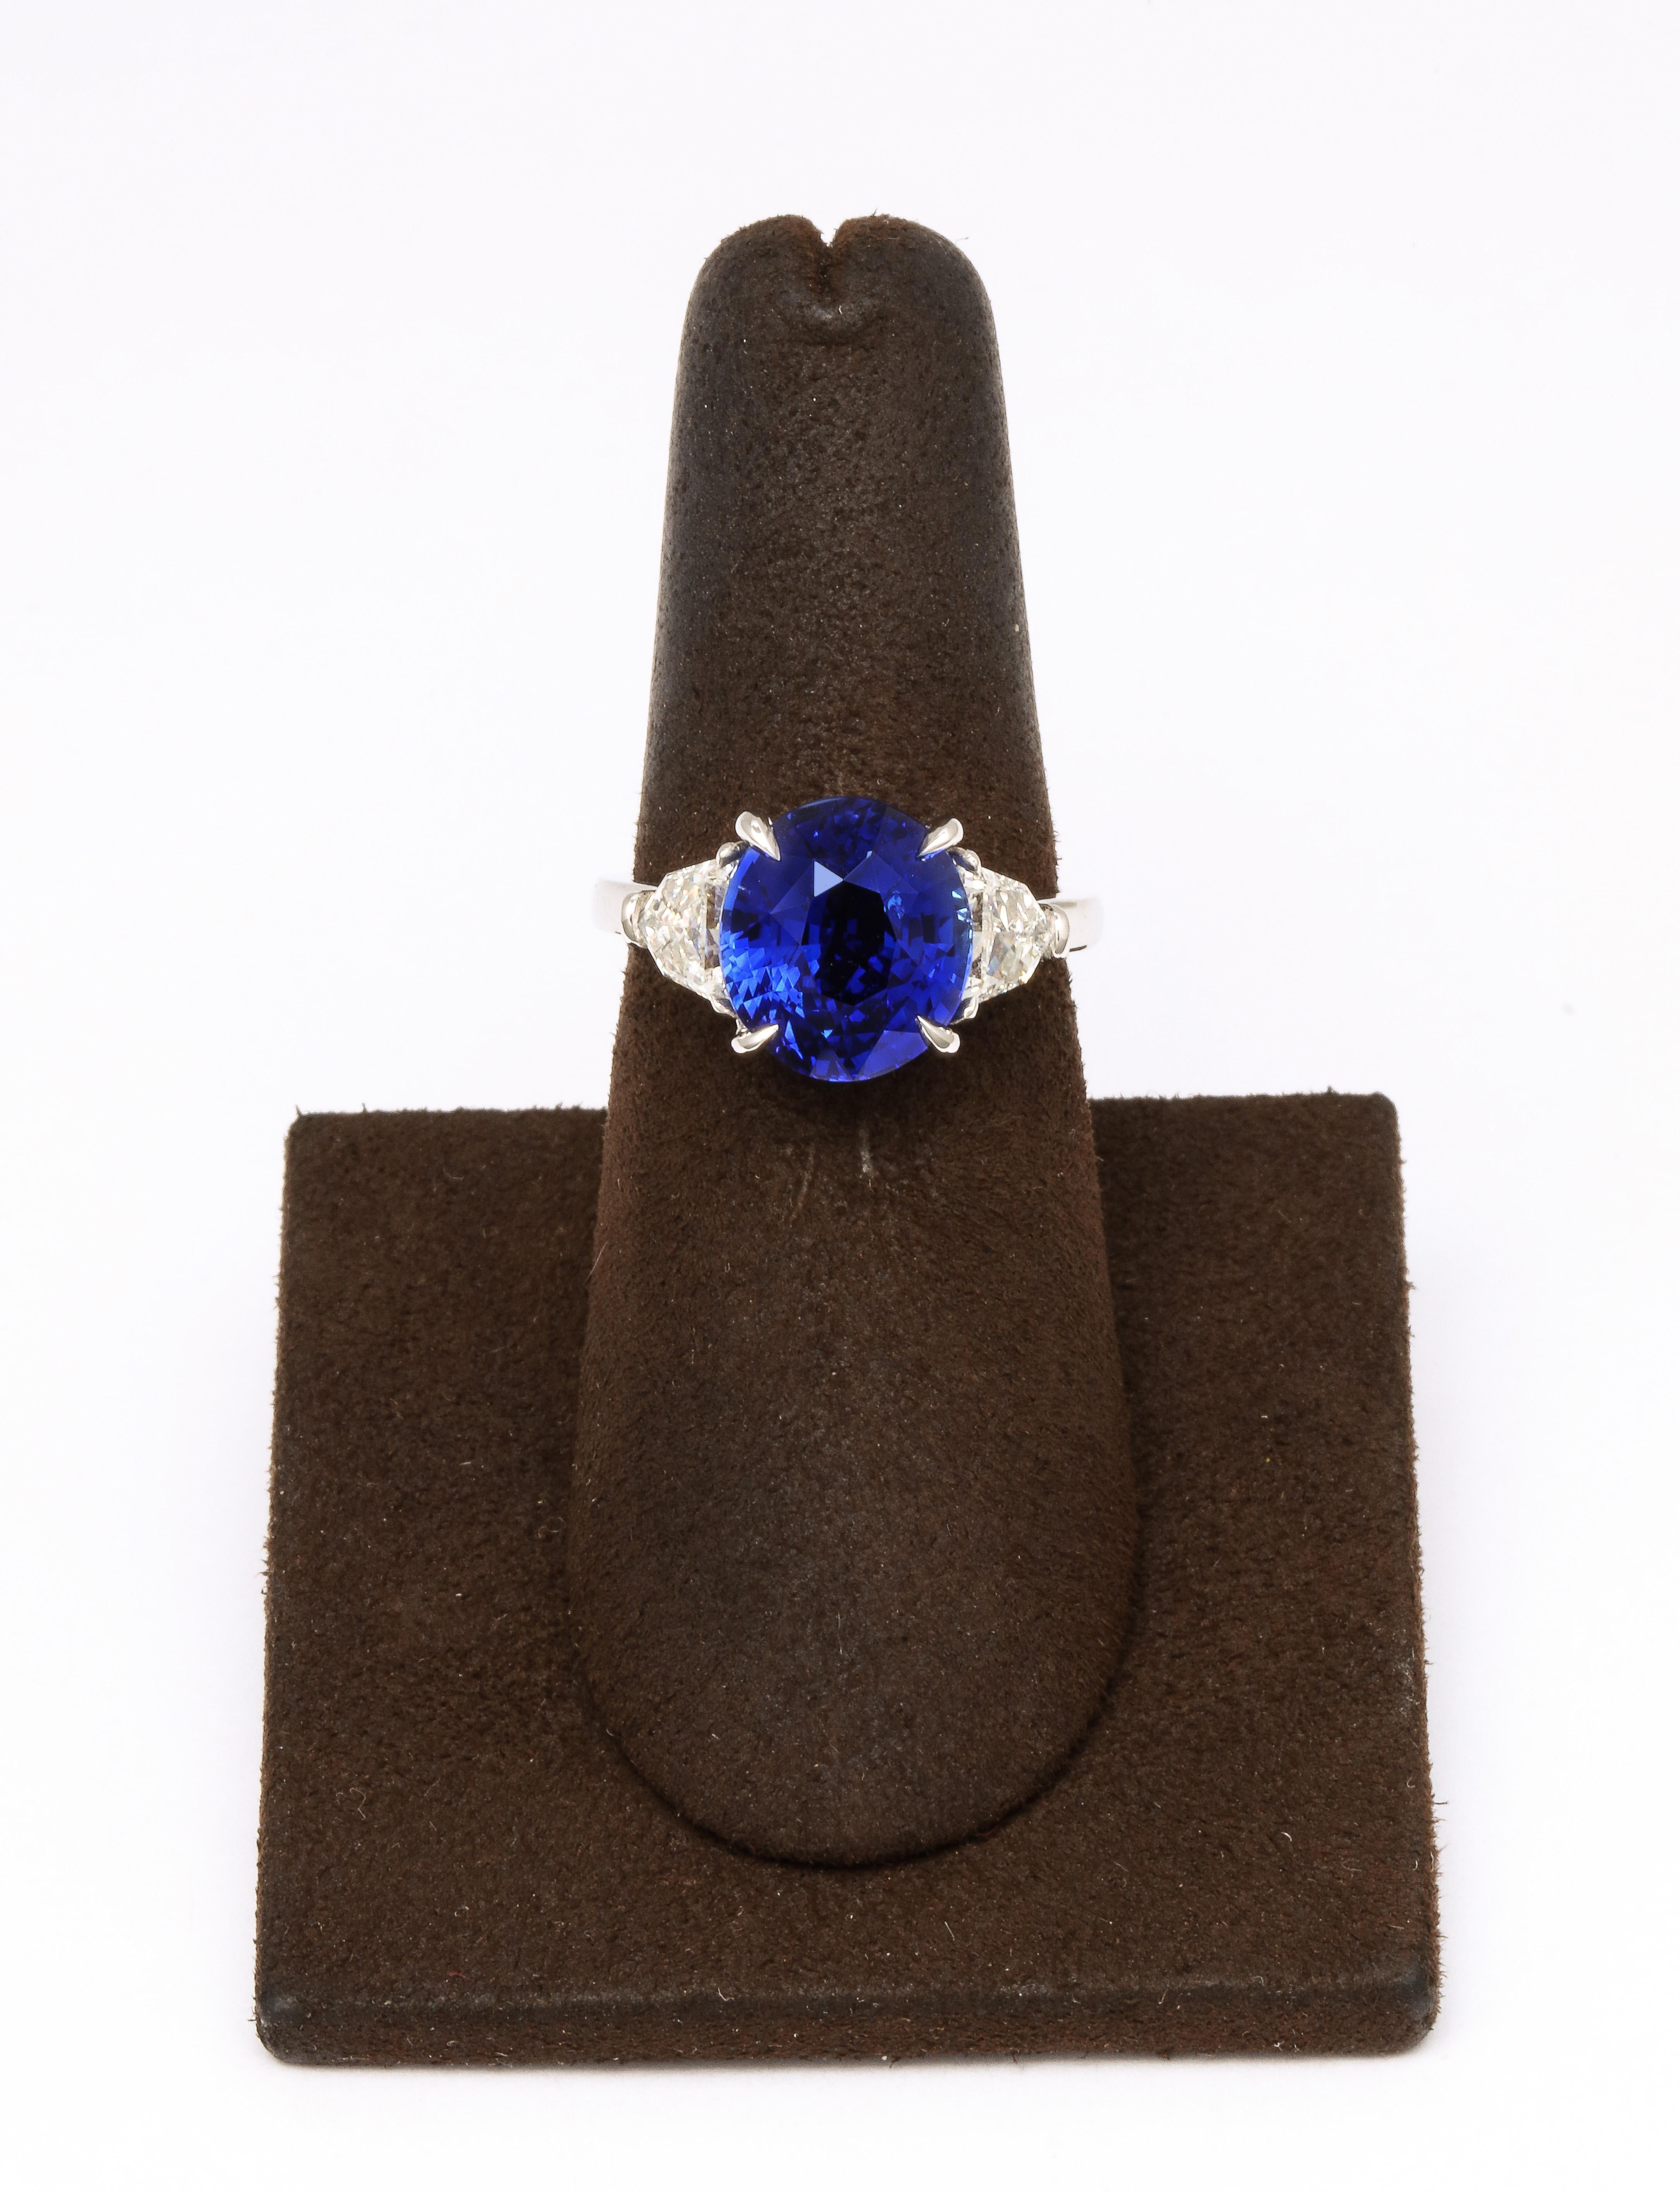 
6.01 carat oval cut certified Ceylon Vivid Blue Sapphire set in a custom made platinum ring with .85 carats of white side diamonds. 

Certified by Christian Dunaigre Lab of Switzerland. 

Currently a size 6.25, this ring can be resized to any